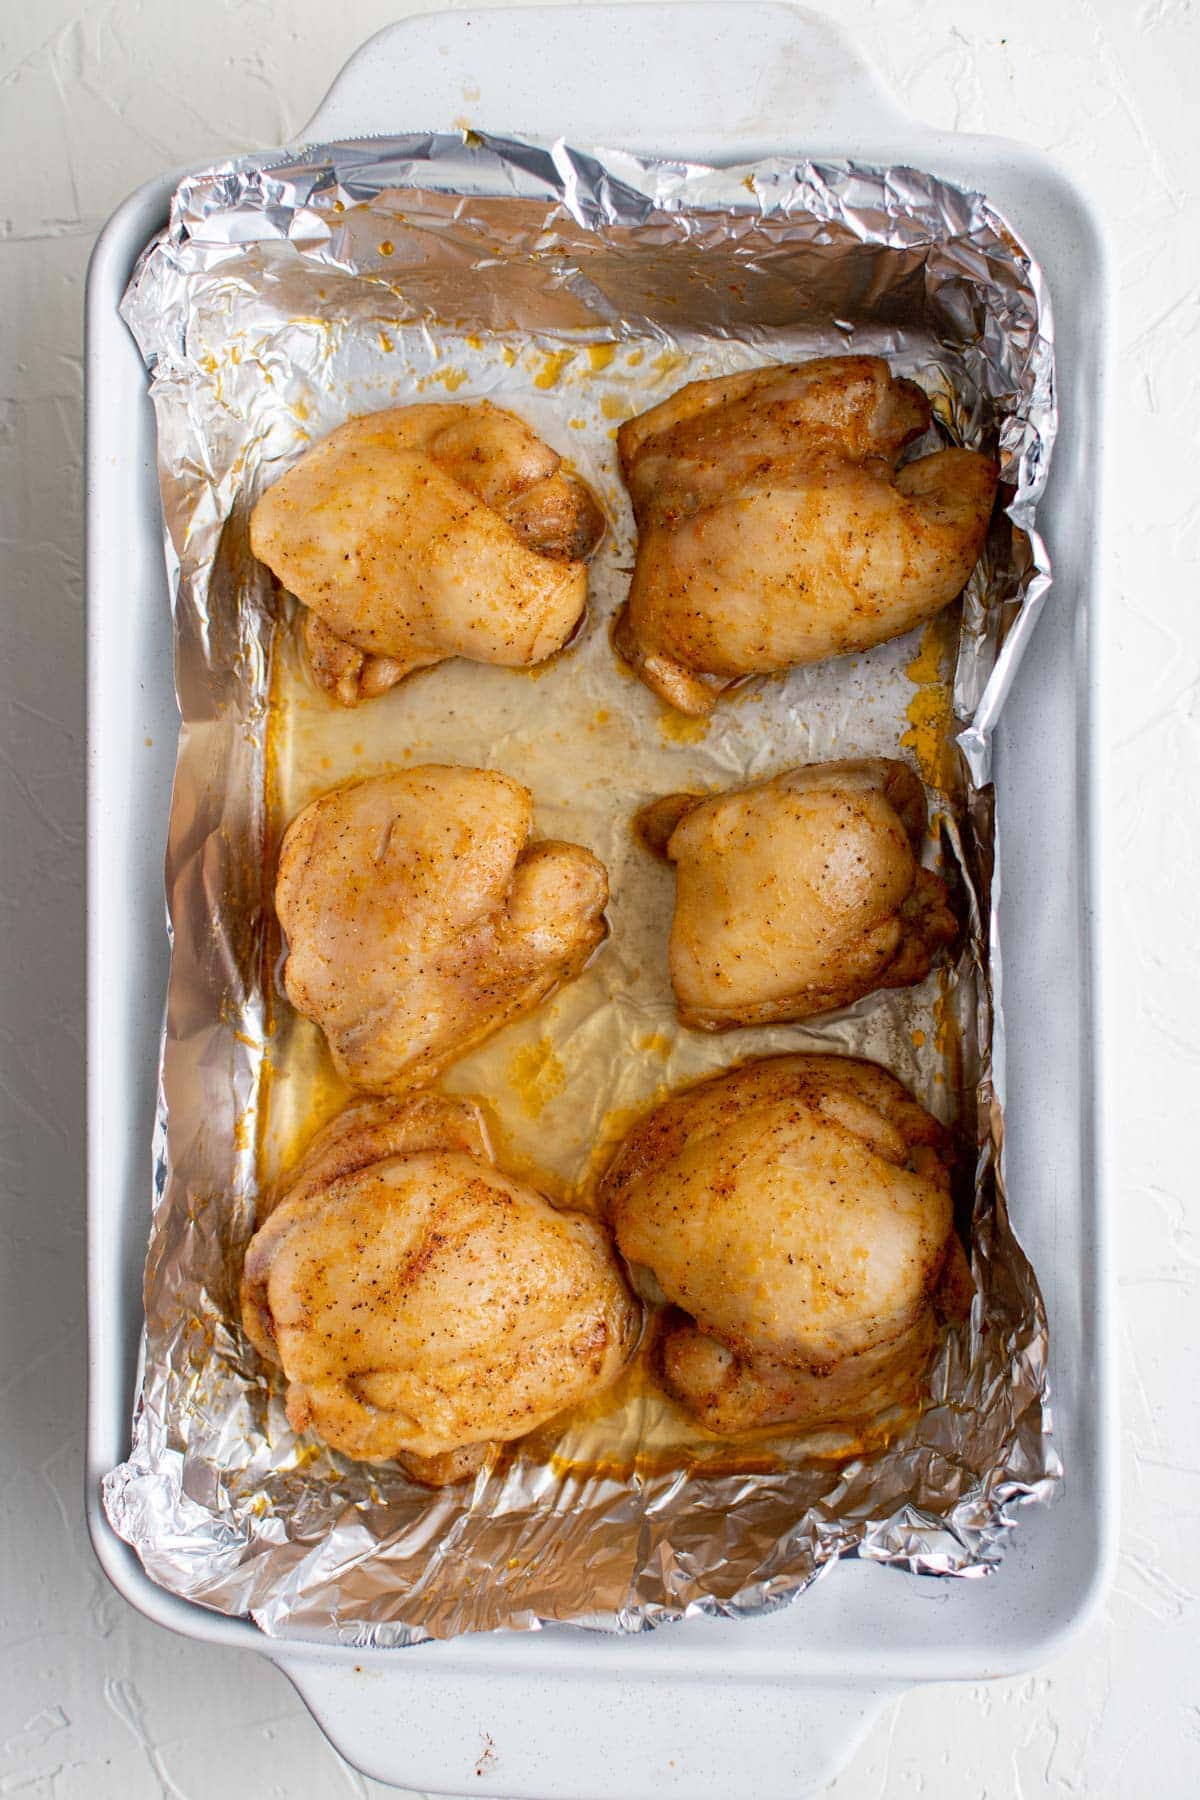 roasted chicken thighs bakeng dish with foil